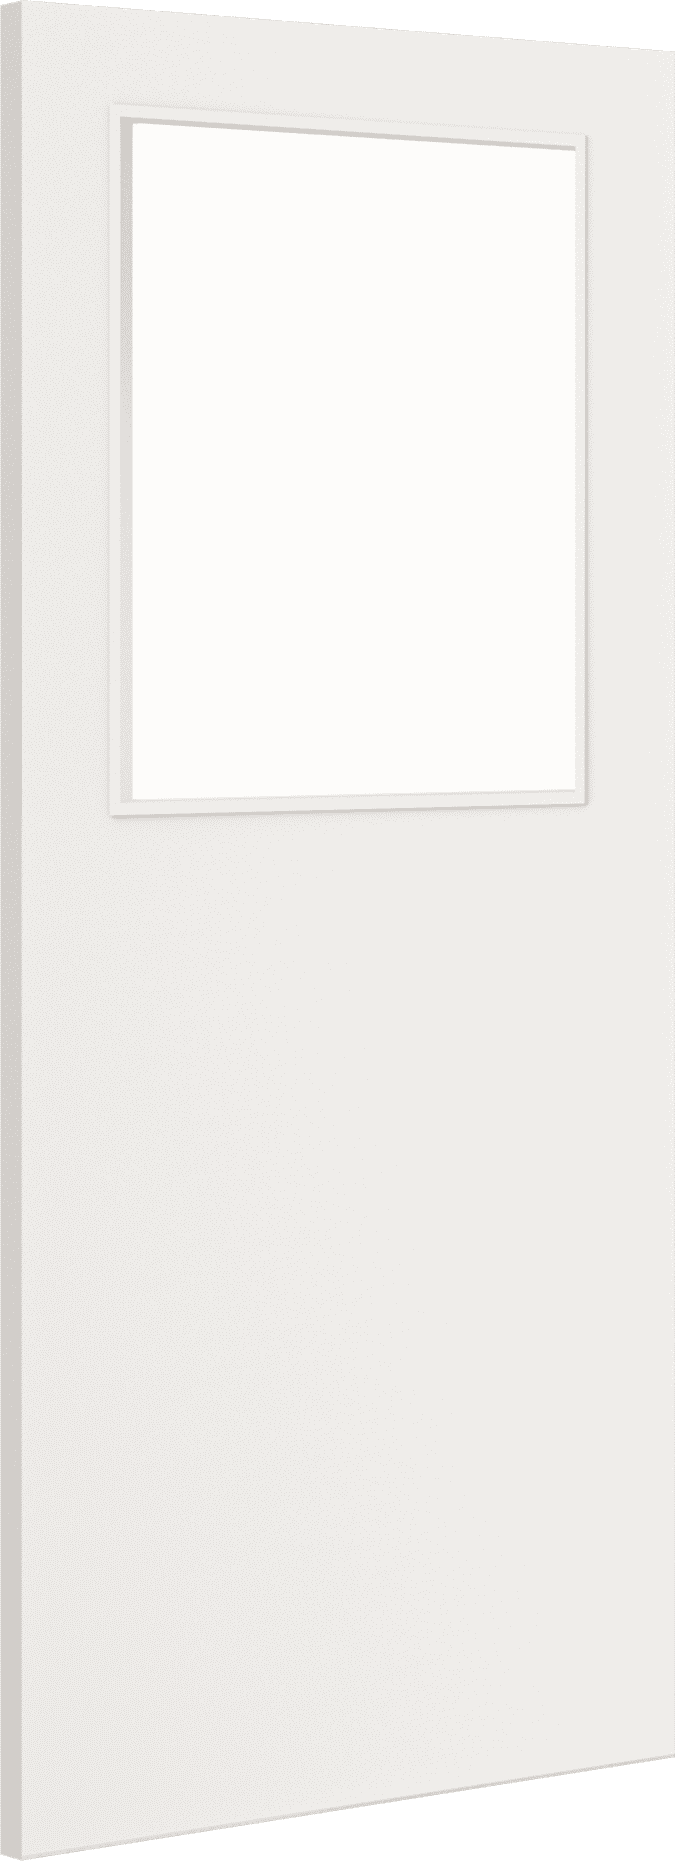 2040mm x 626mm x 44mm Architectural Paint Grade White 01 Frosted Glazed Fire Door Blank